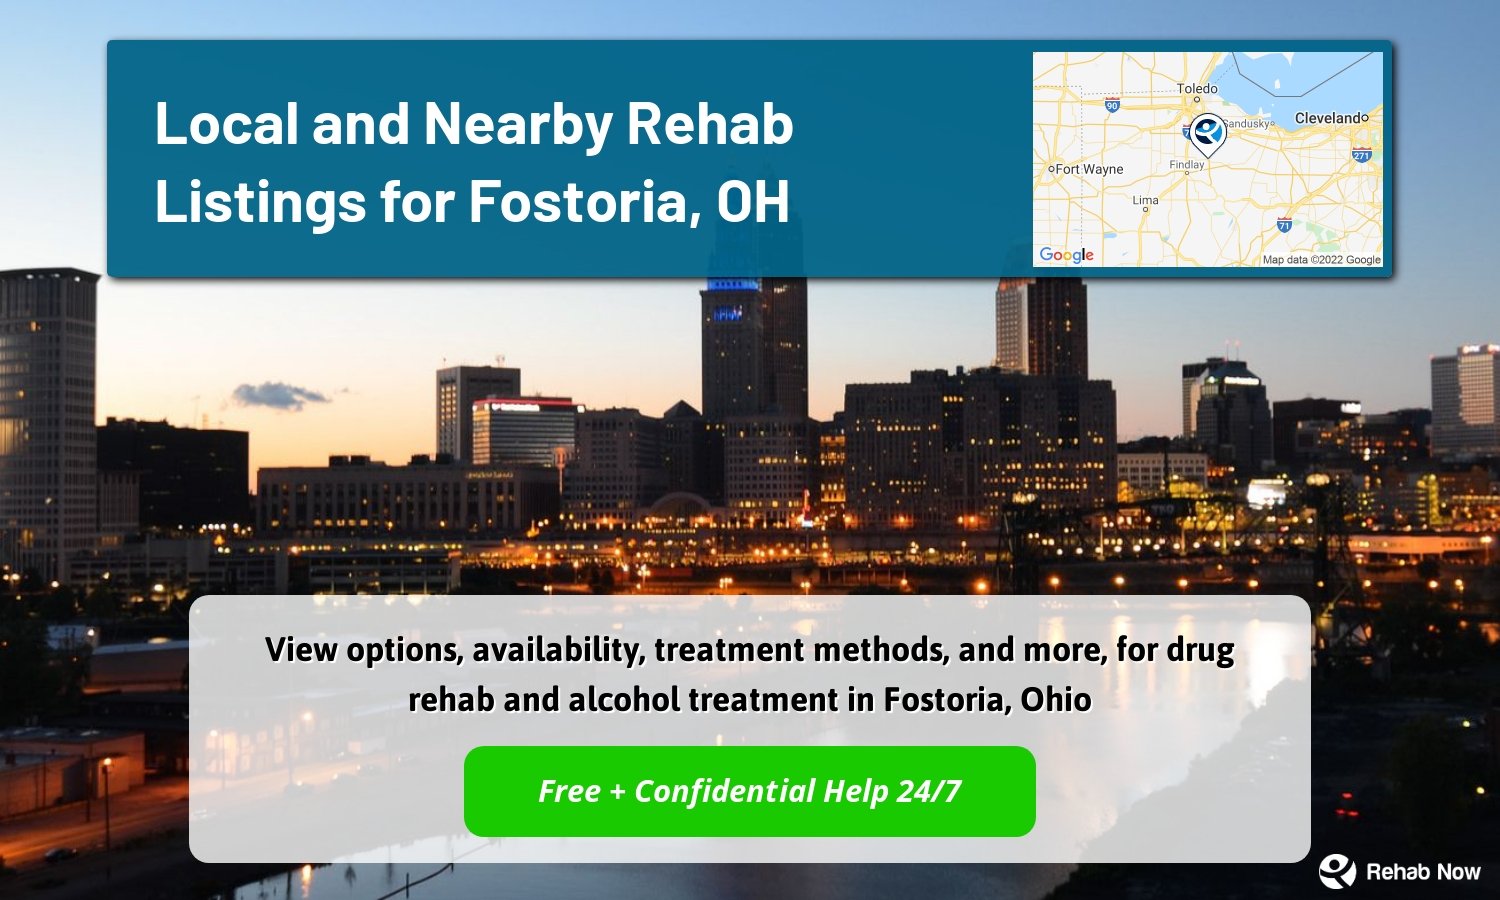 View options, availability, treatment methods, and more, for drug rehab and alcohol treatment in Fostoria, Ohio